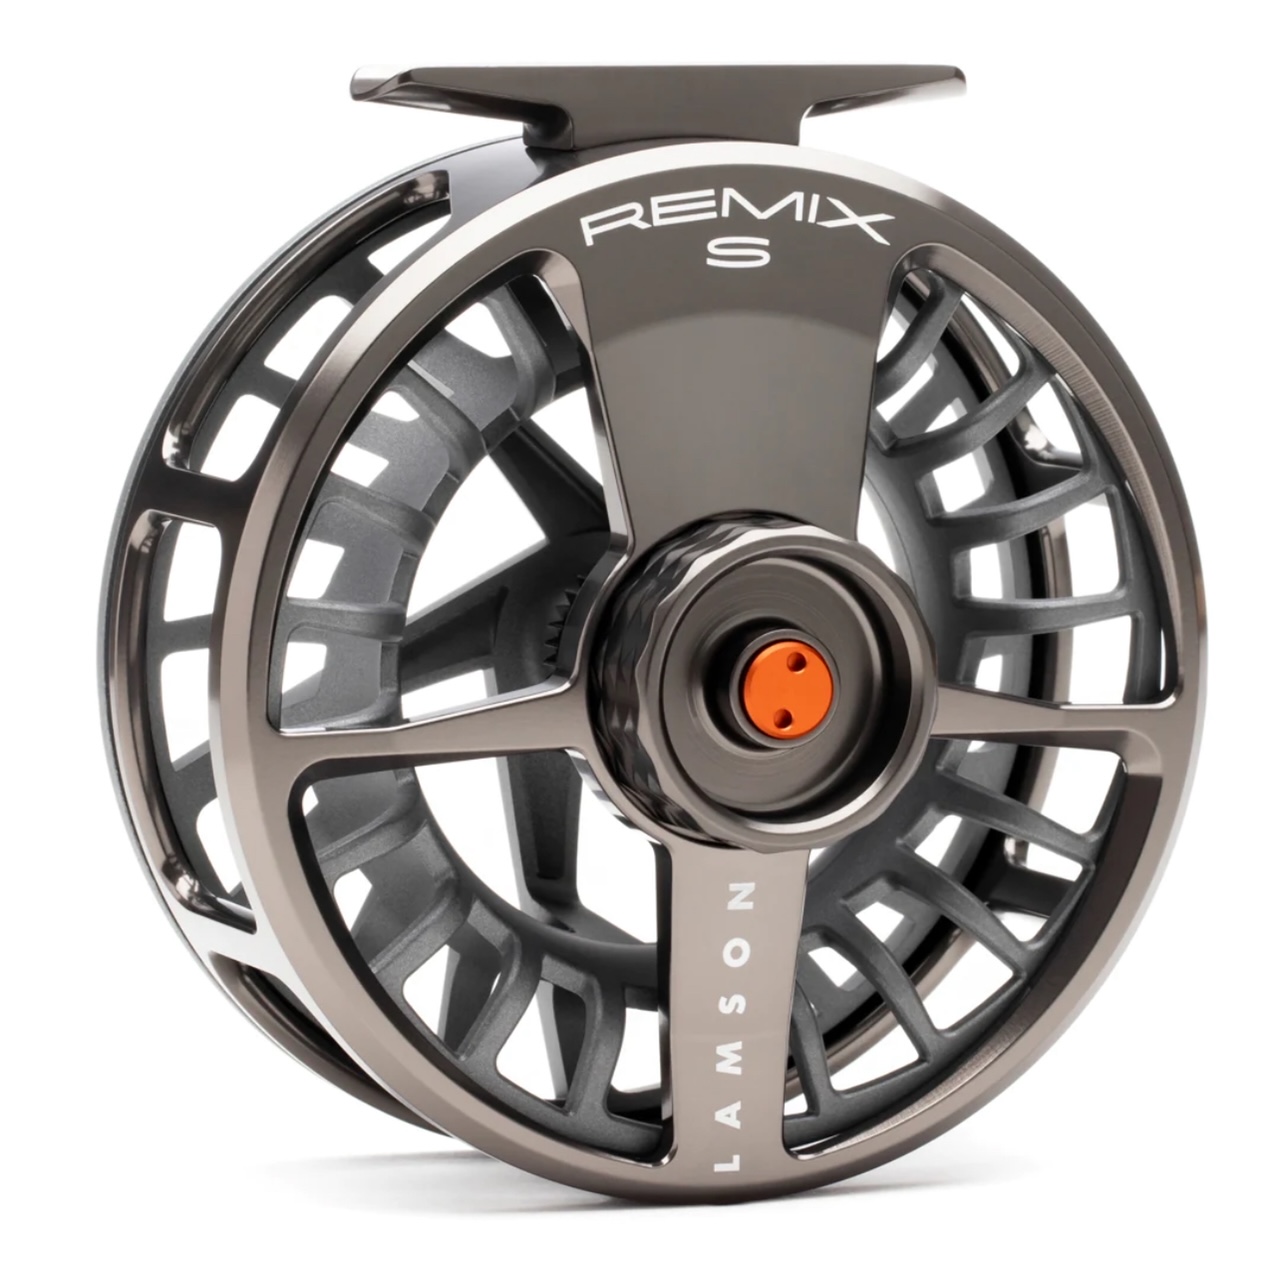 HATCH Iconic 4 Plus Reel (Black/ Silver) Large Arbor - Royal Gorge Anglers